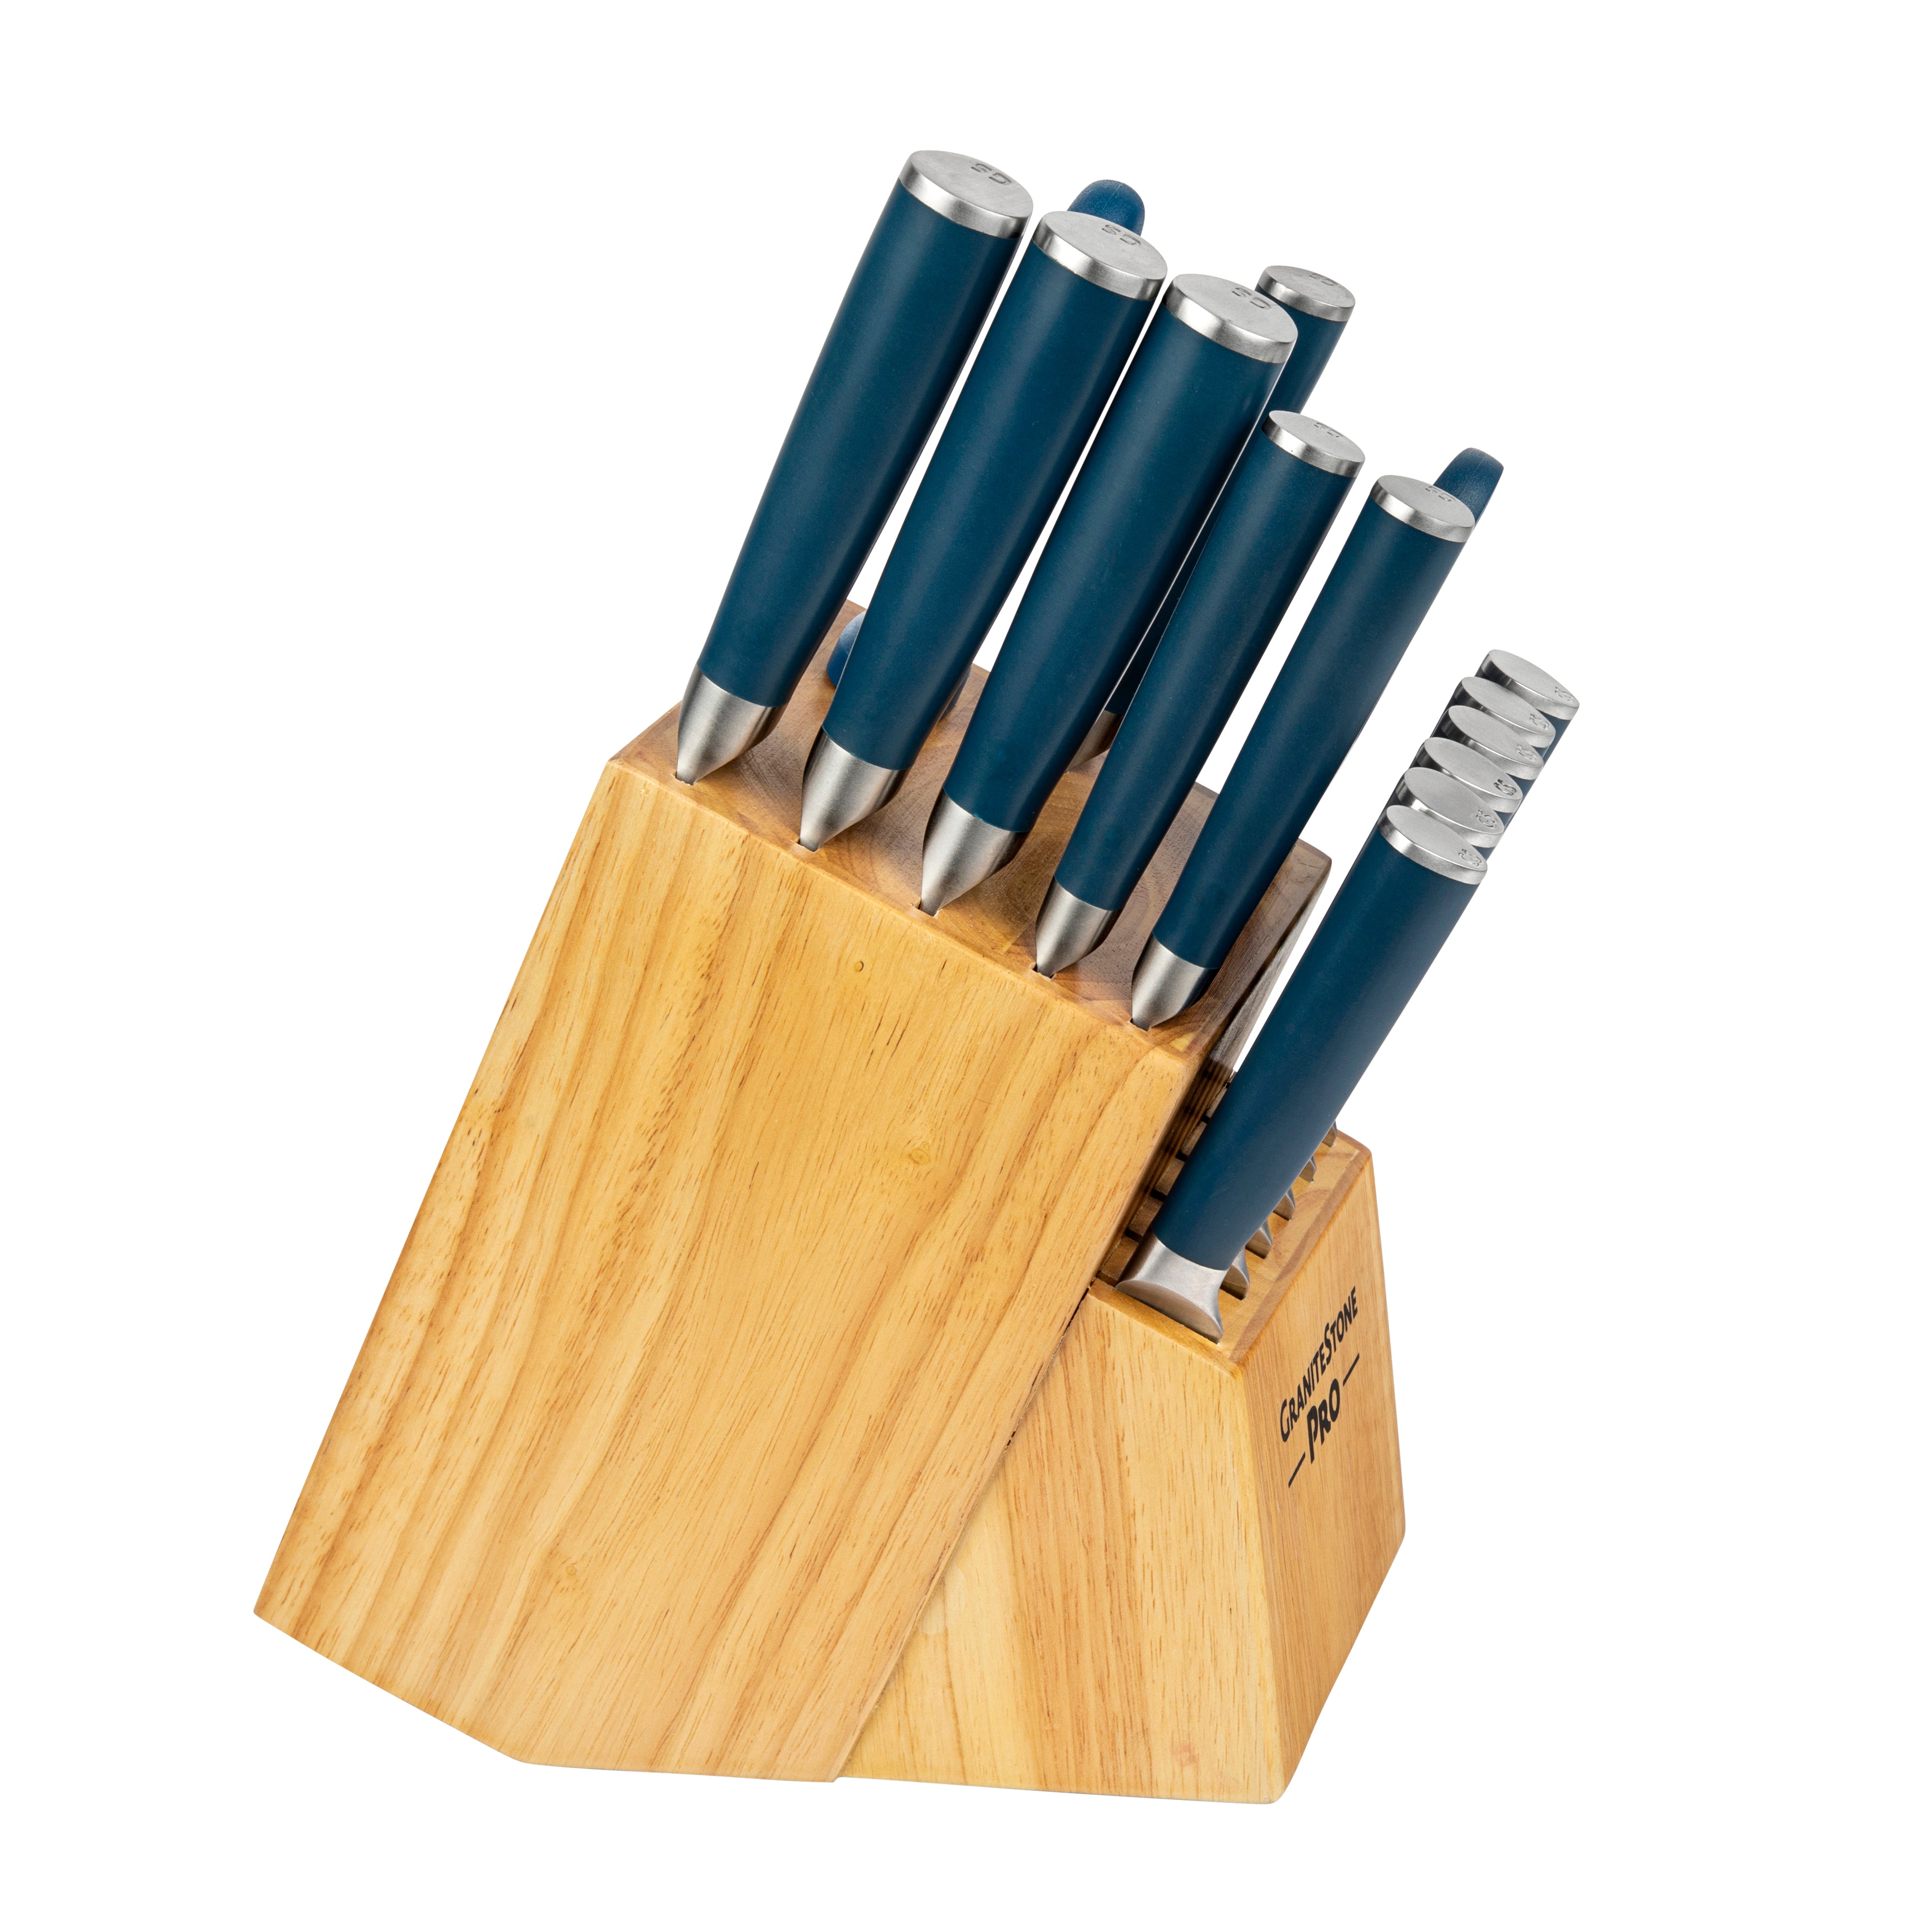 GRANITESTONE Nutri Blade Pro 14-Piece Stainless Steel Premium Chef Knife Set  with Knife Block in Blue 8100 - The Home Depot